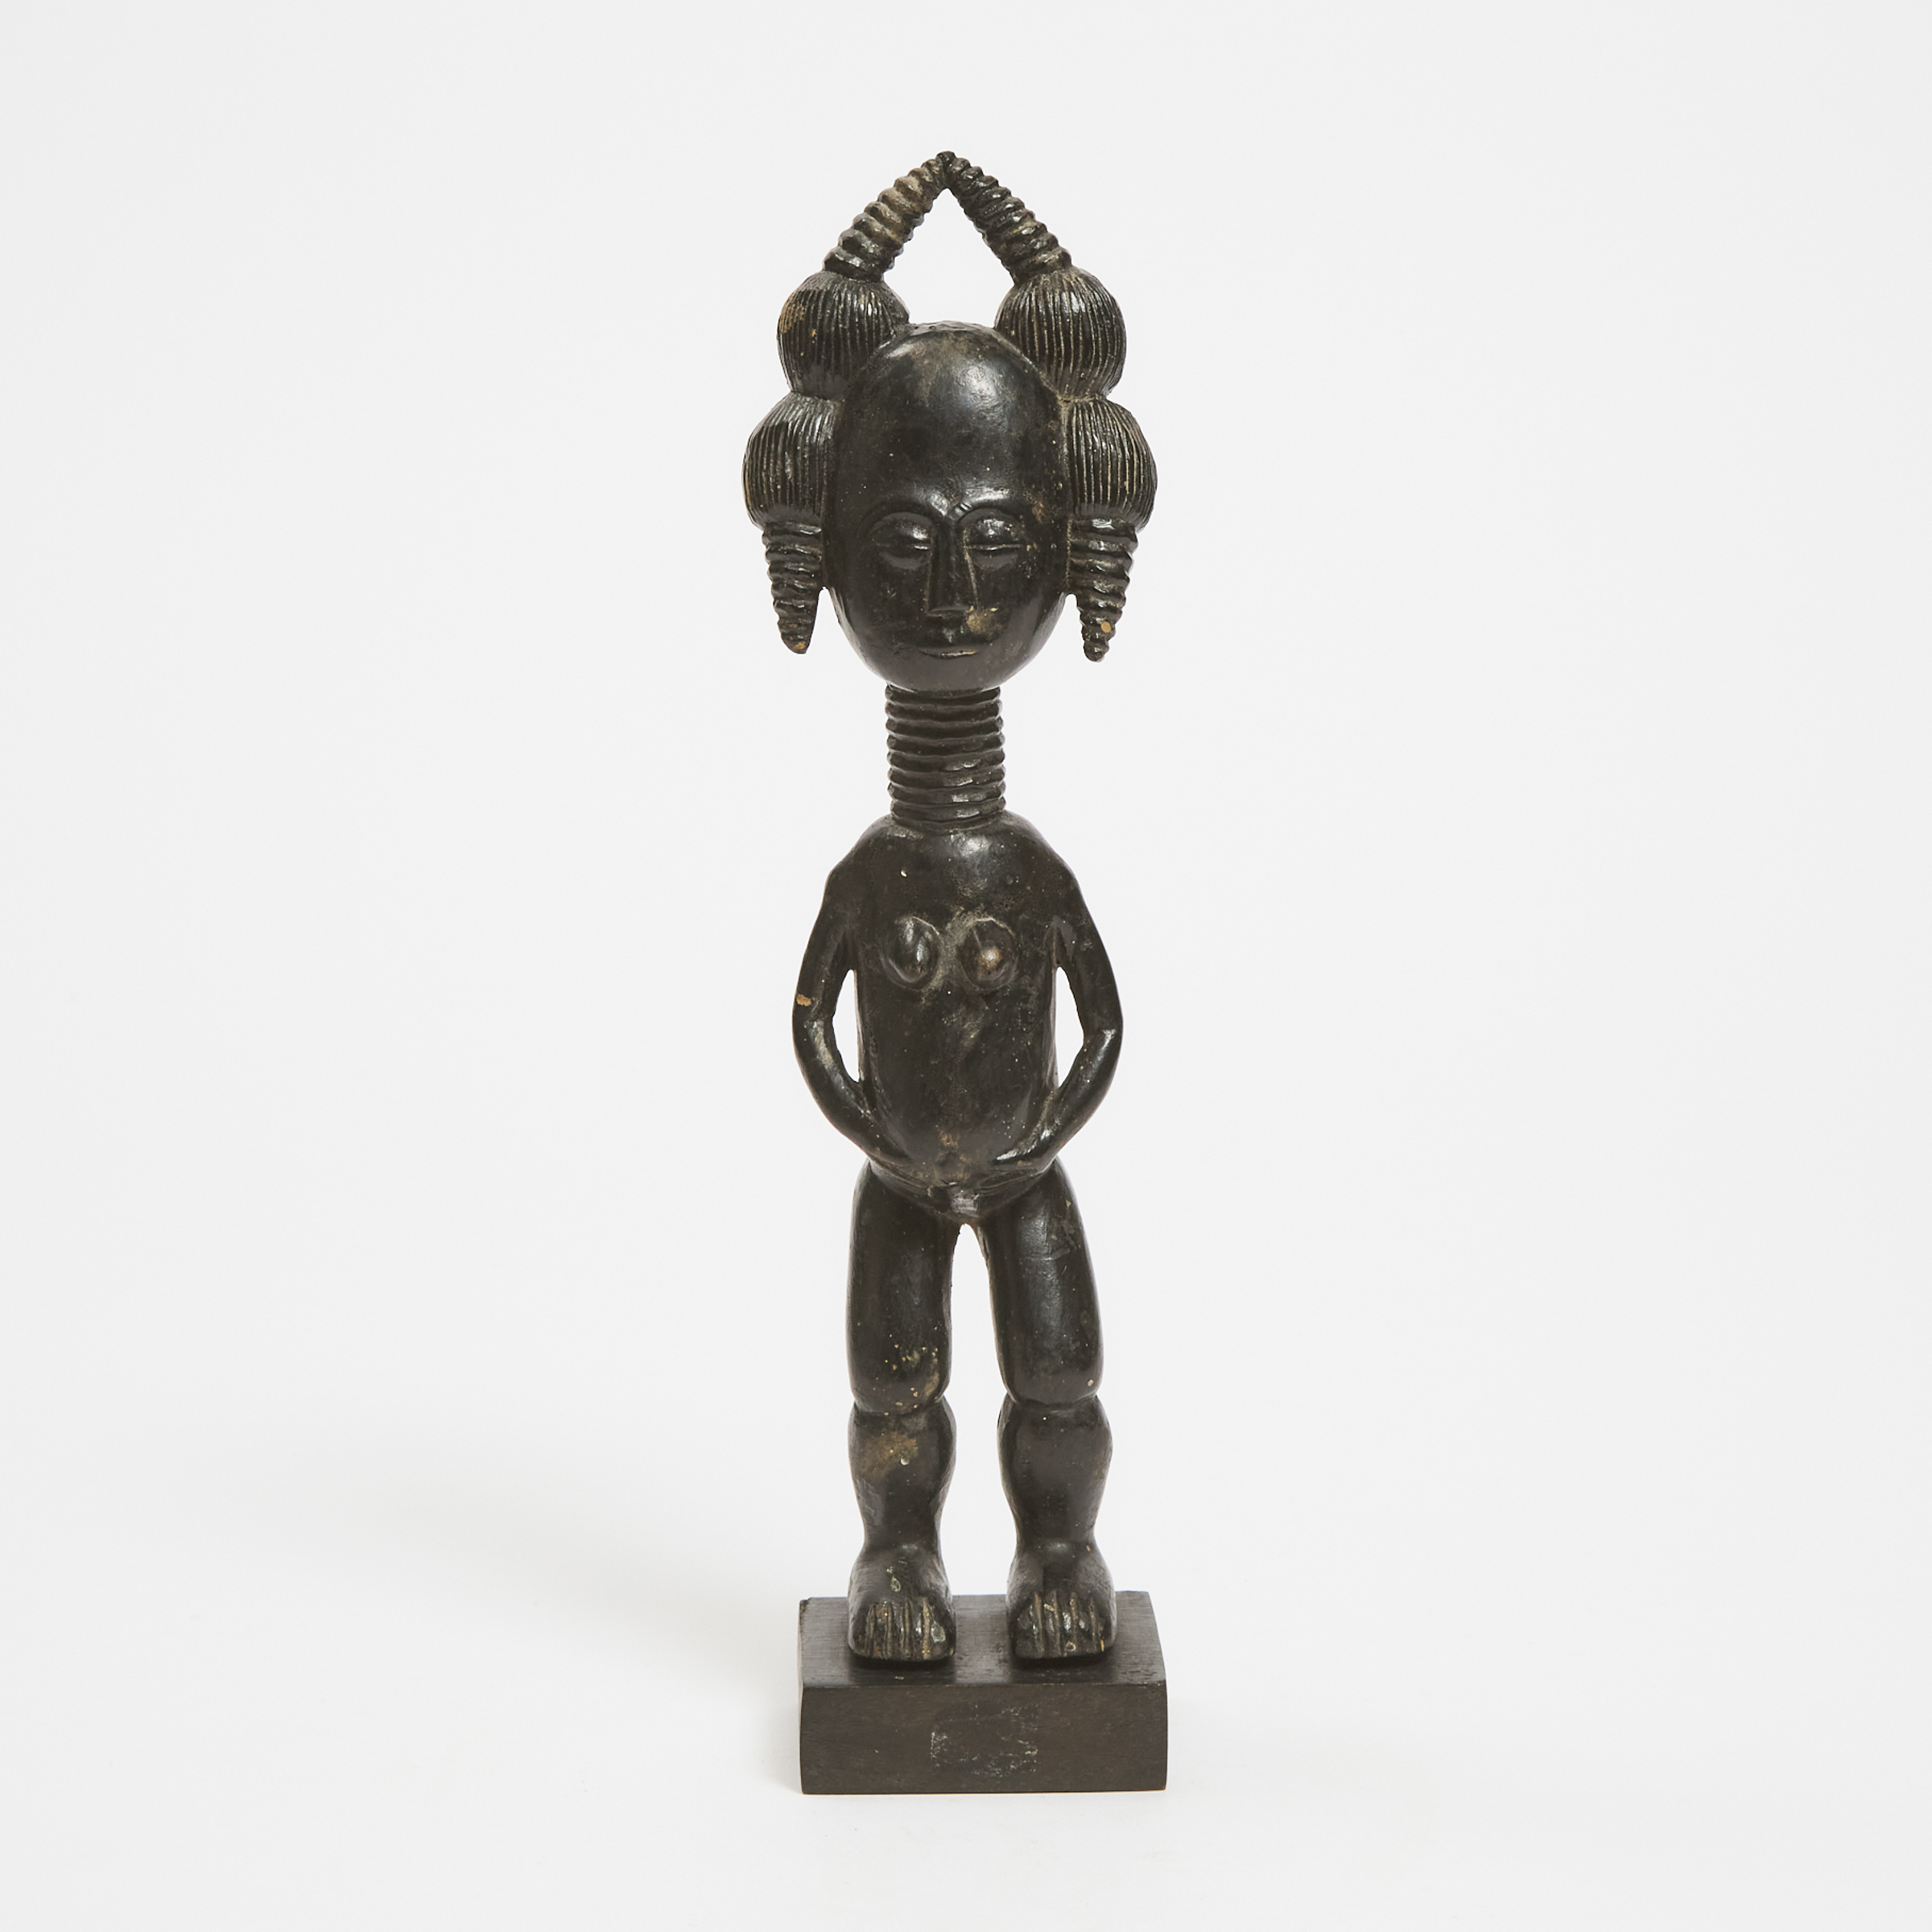 Unidentifed African Maternity Figure, possibly Attye or Mende, 20th century